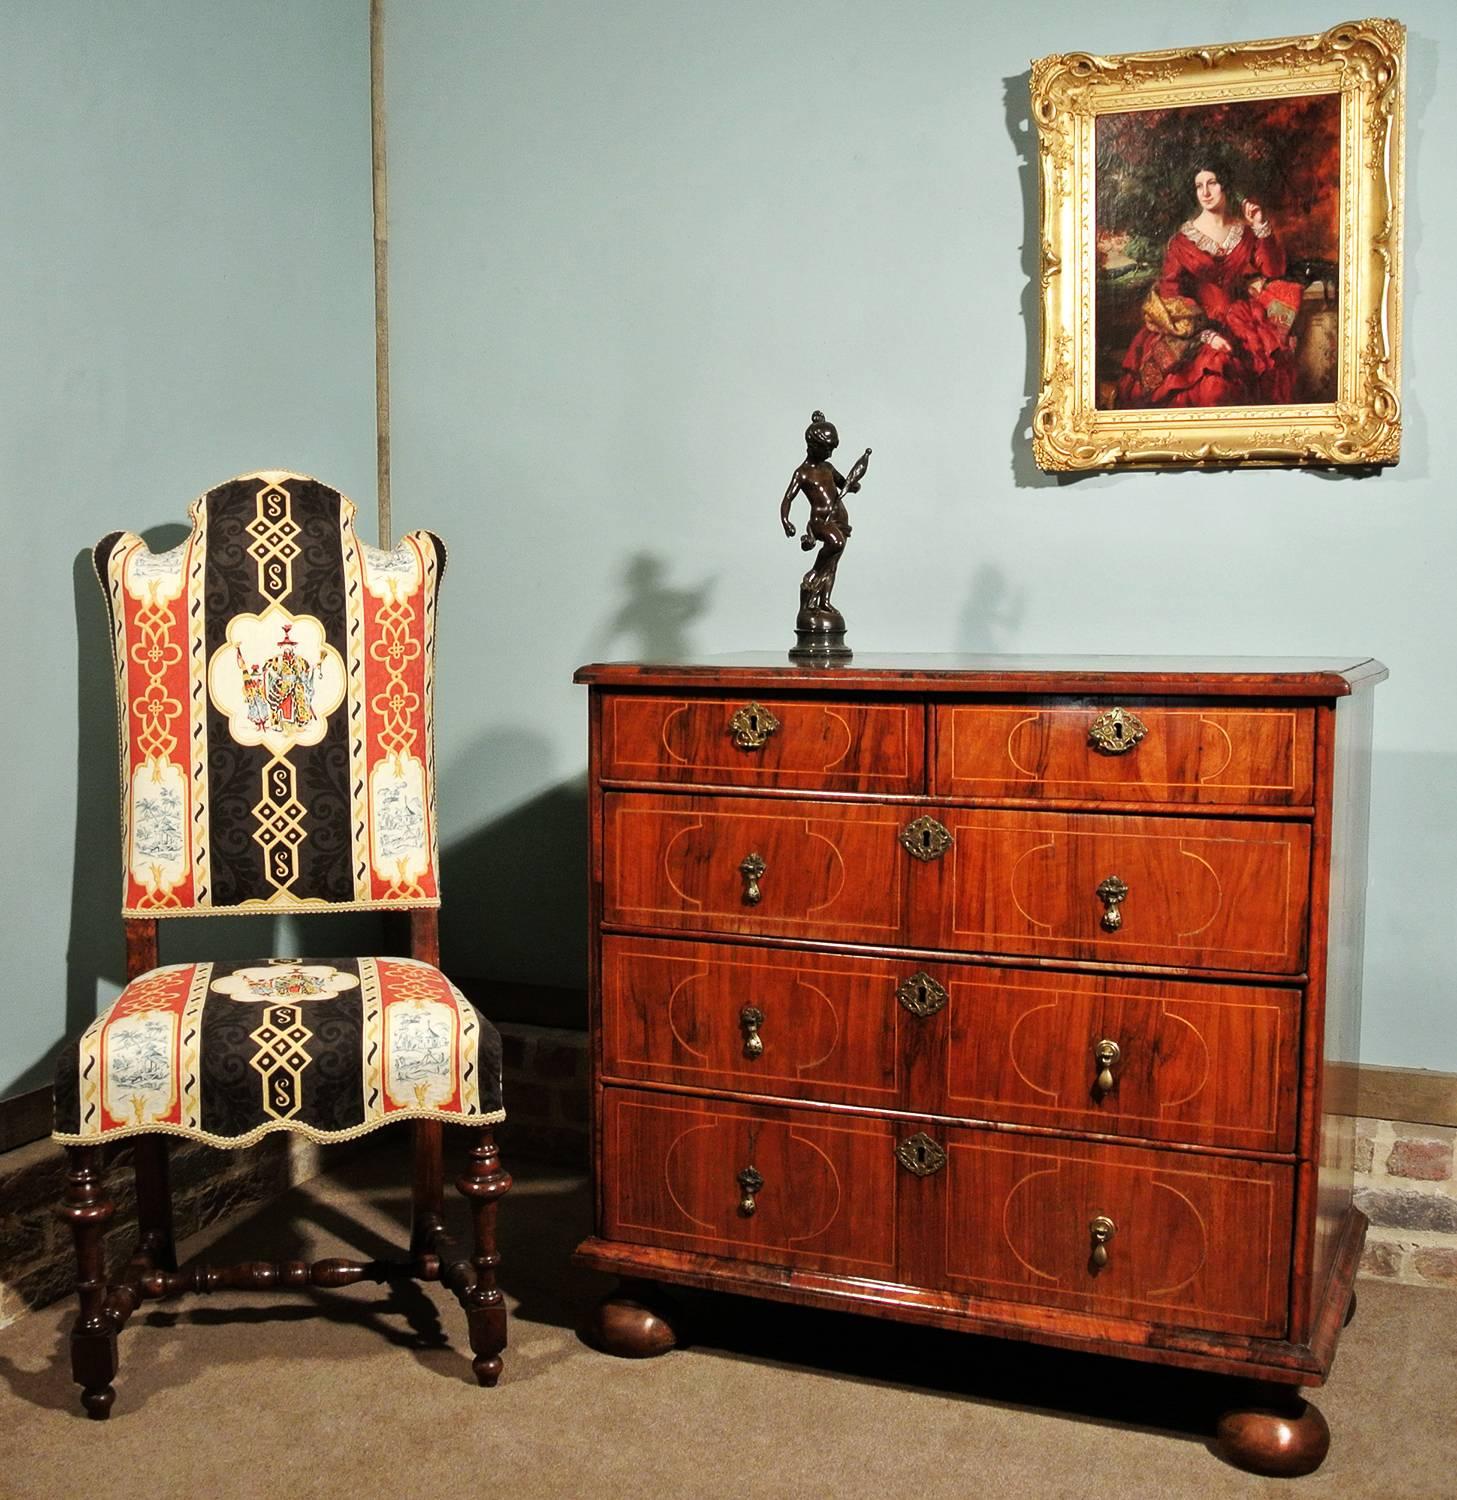 British Queen Anne Inlaid Walnut and Oak Chest of Drawers, circa 1700 For Sale